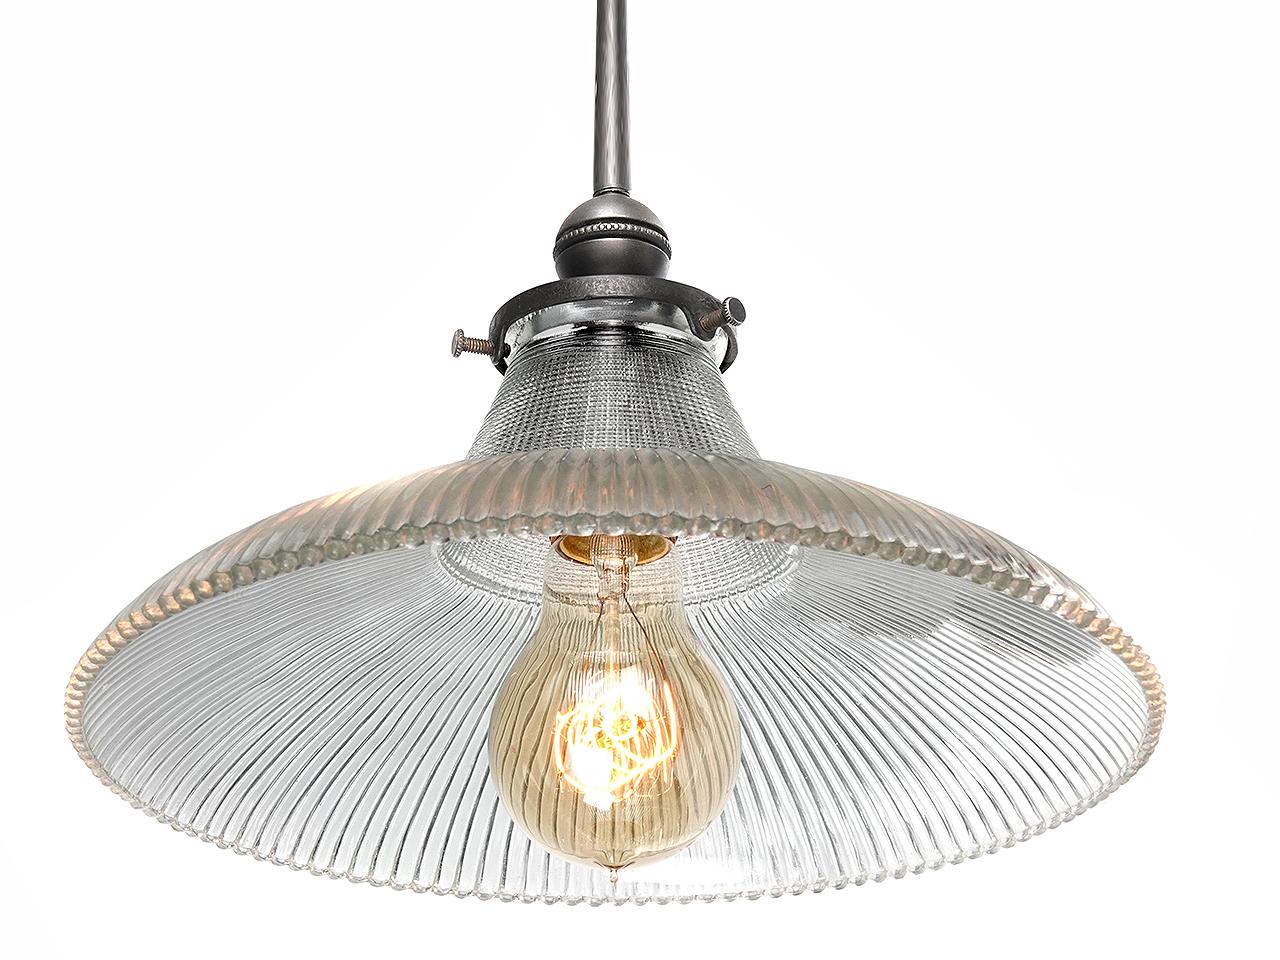 This is a nice simple Prismatic pendent. Prismatic glass gives the off a nice warm glow and can feel early and modern at the same time. This example features a 10 in diameter shade. We have a good collection of these priced per lamp.